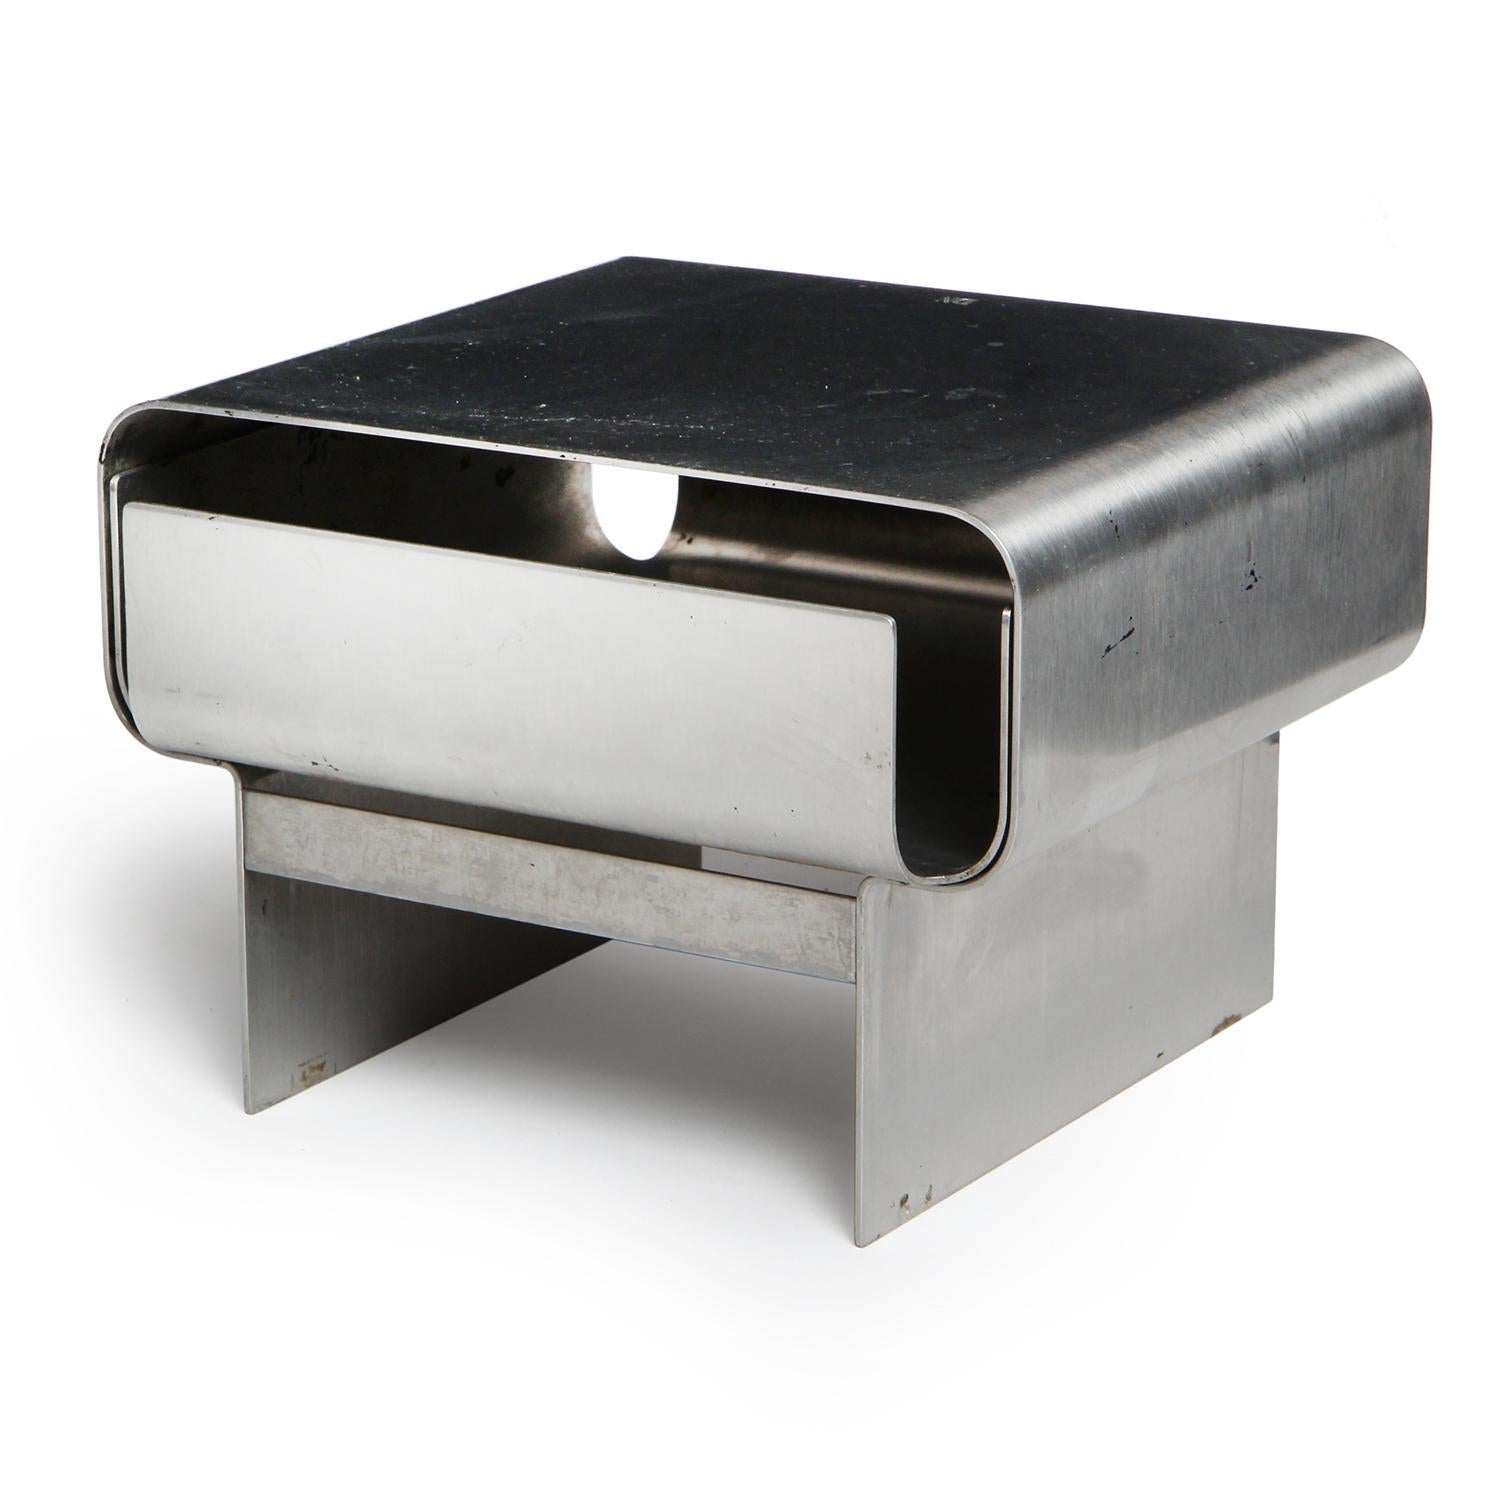 An architectural desktop storage drawer crafted of solid chromed steel. Stamped 